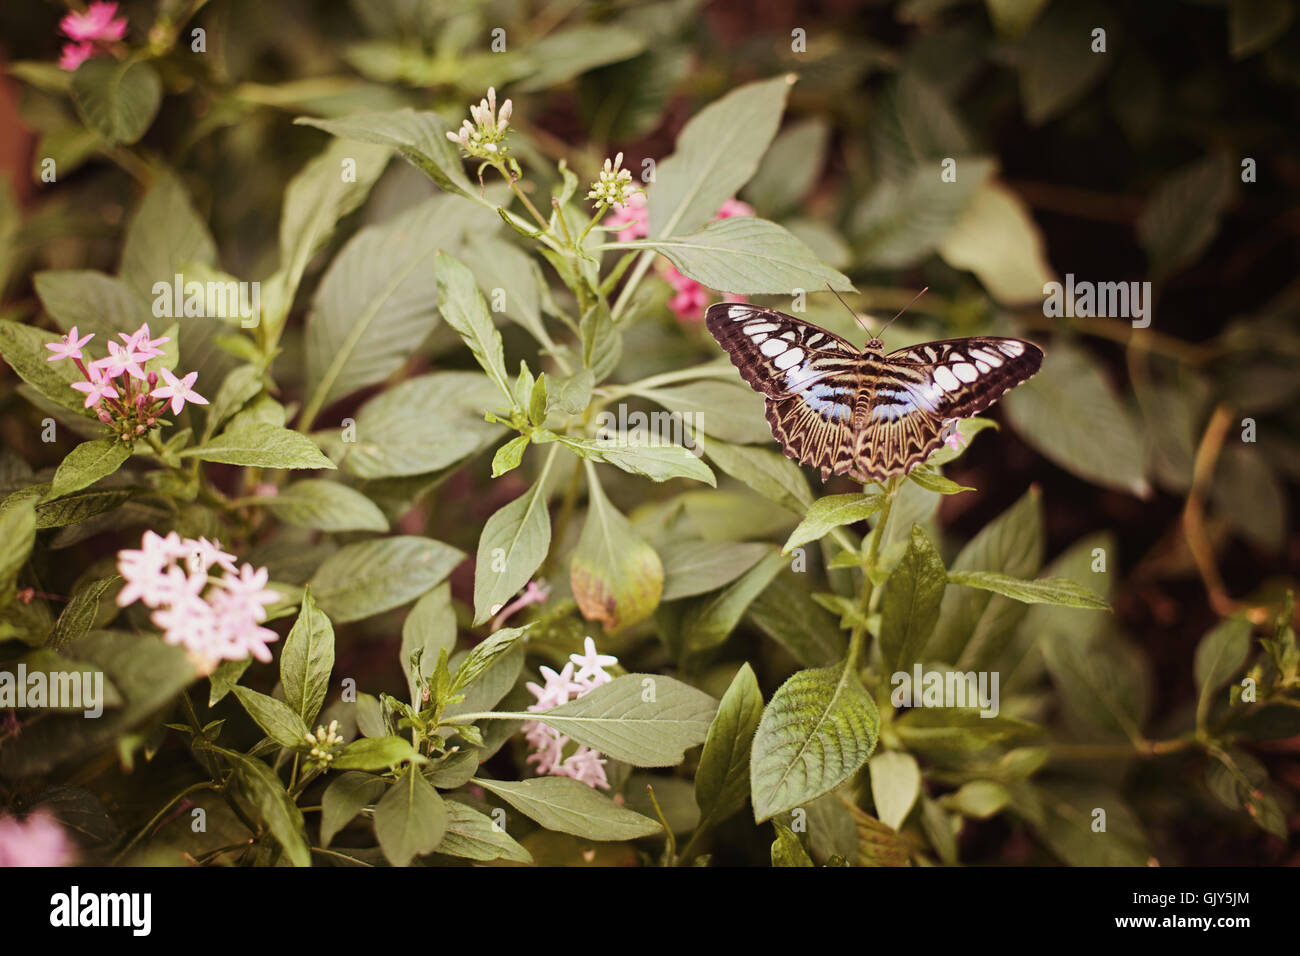 A blue clipper butterfly that has landed on a bush with flowers. Stock Photo